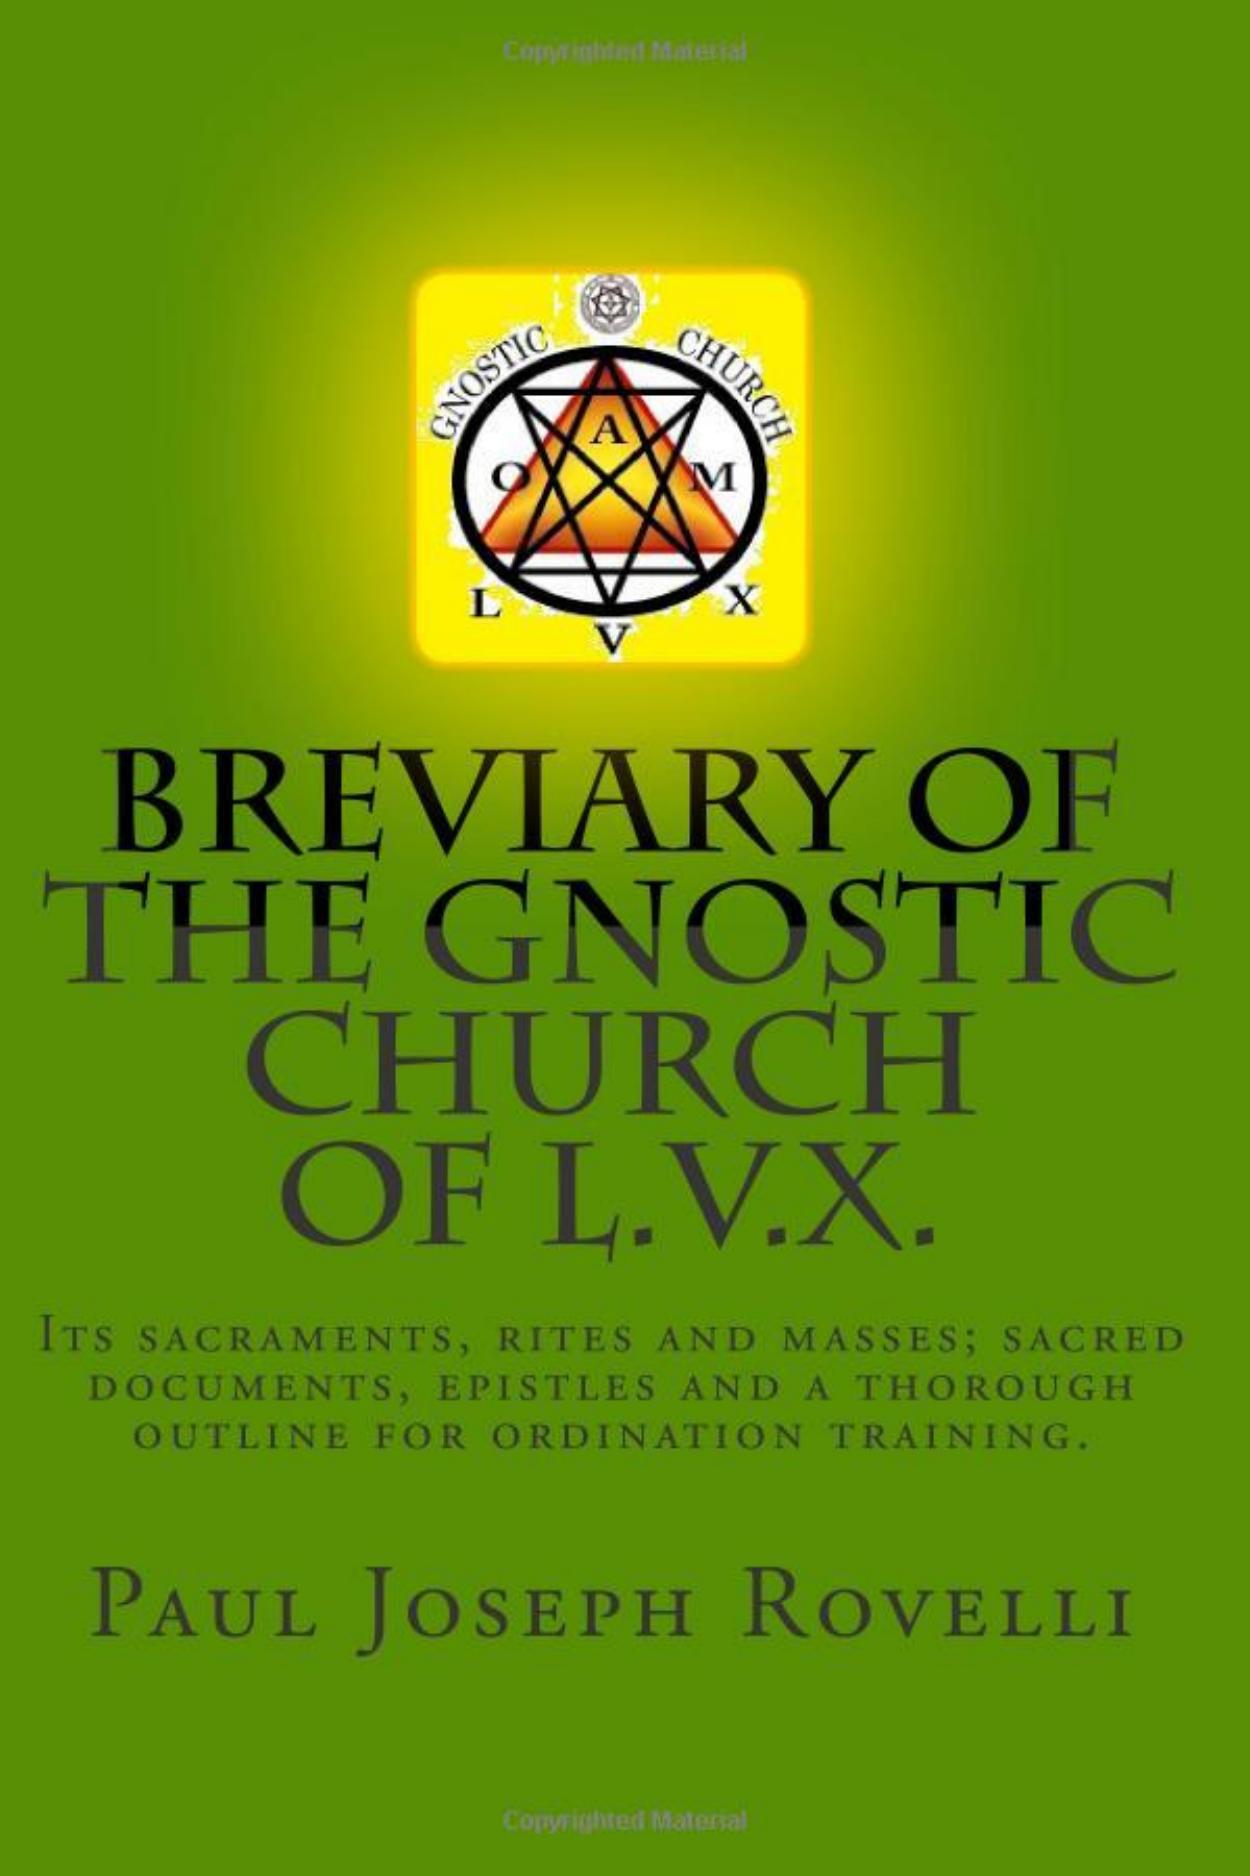 Breviary of the Gnostic Church of L. V. X